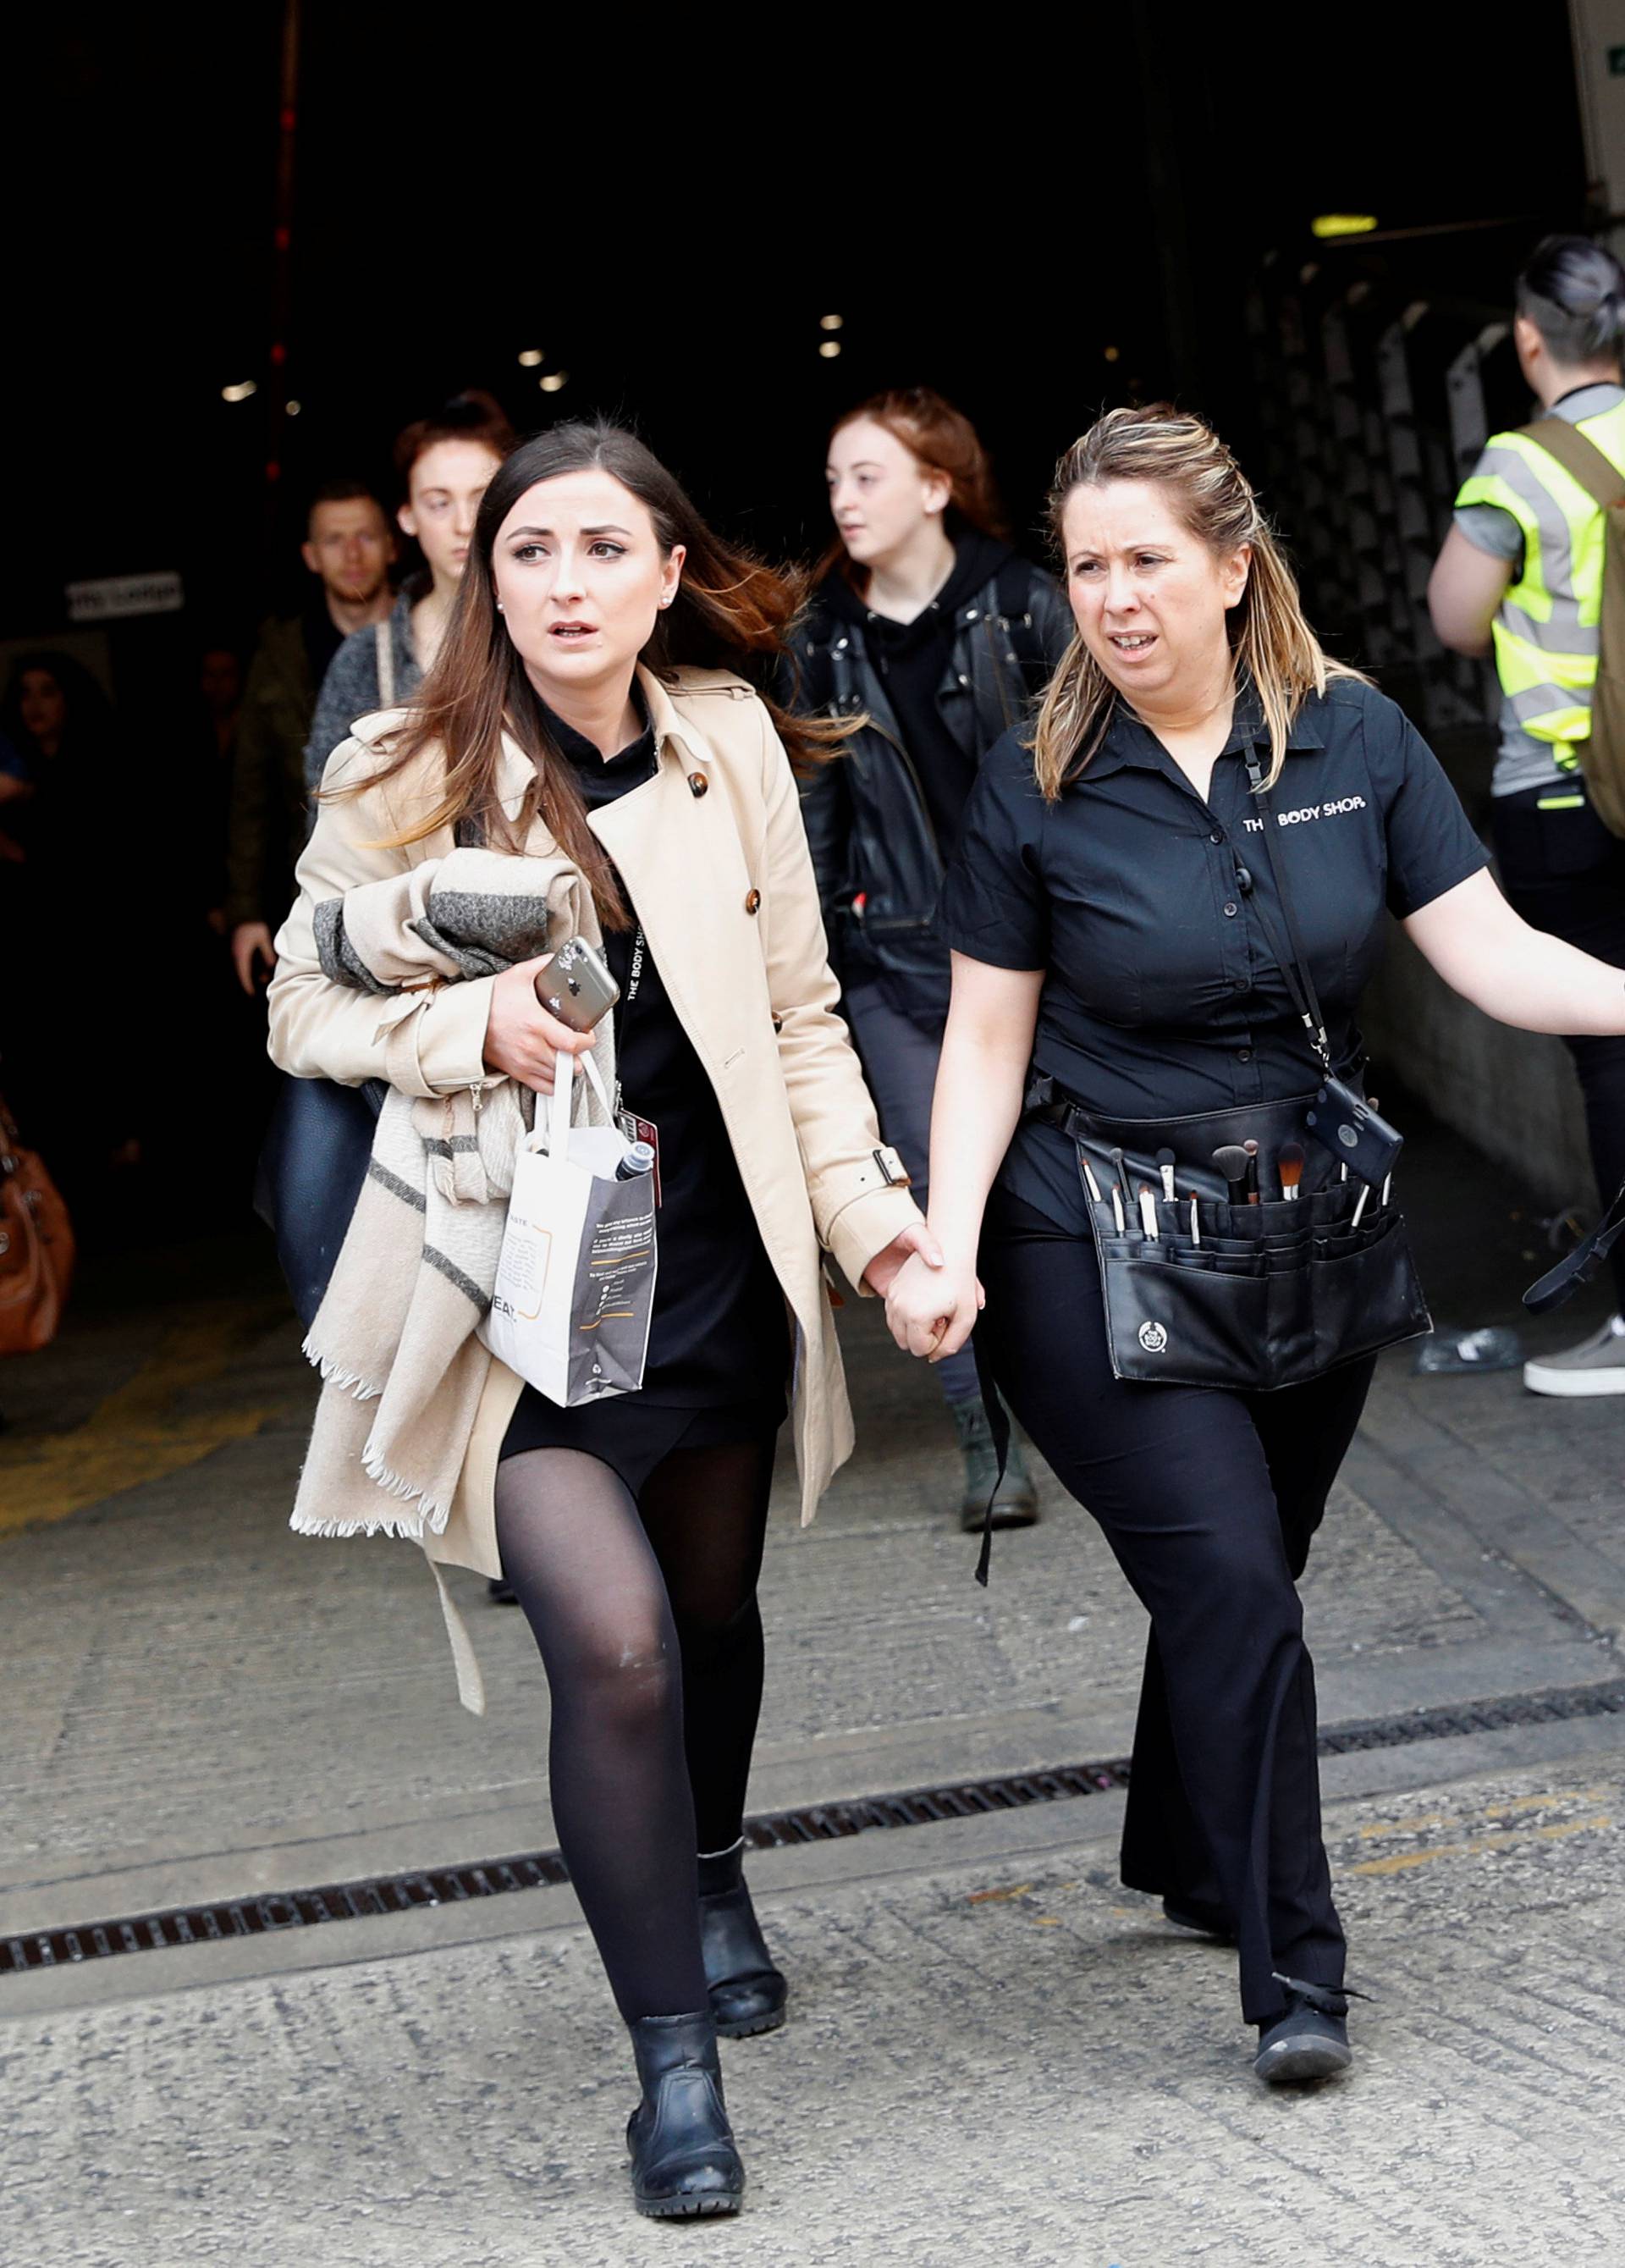 People rush out of the Arndale shopping centre as it is evacuated in Manchester